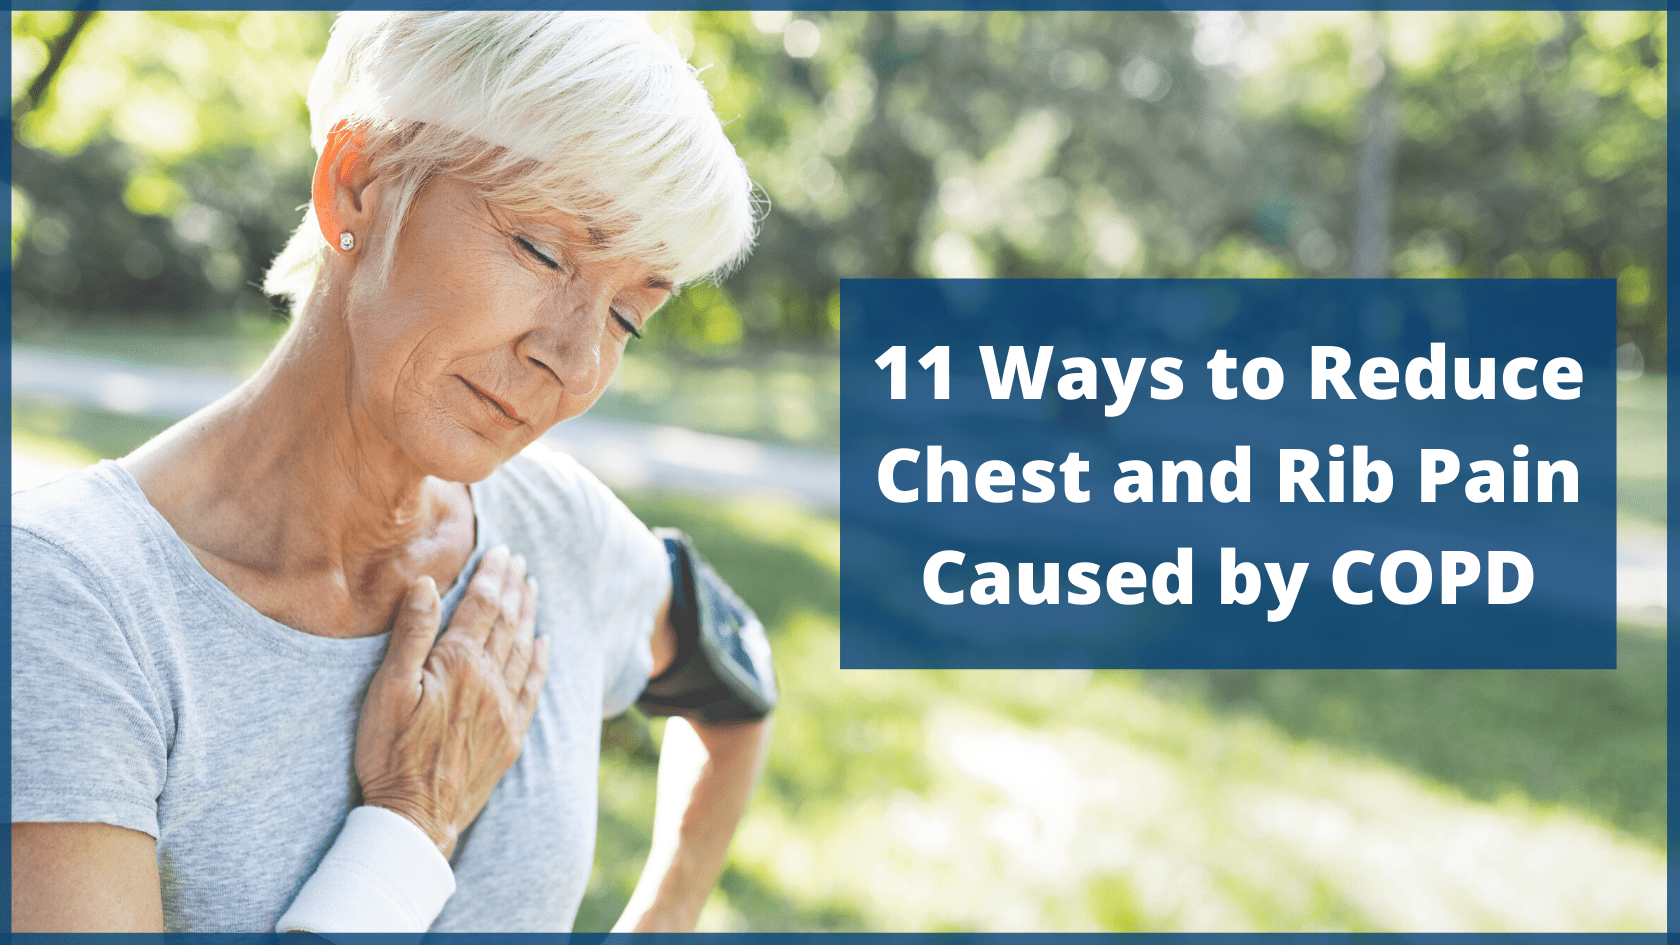 11 Ways to Reduce Chest and Rib Pain Caused by COPD